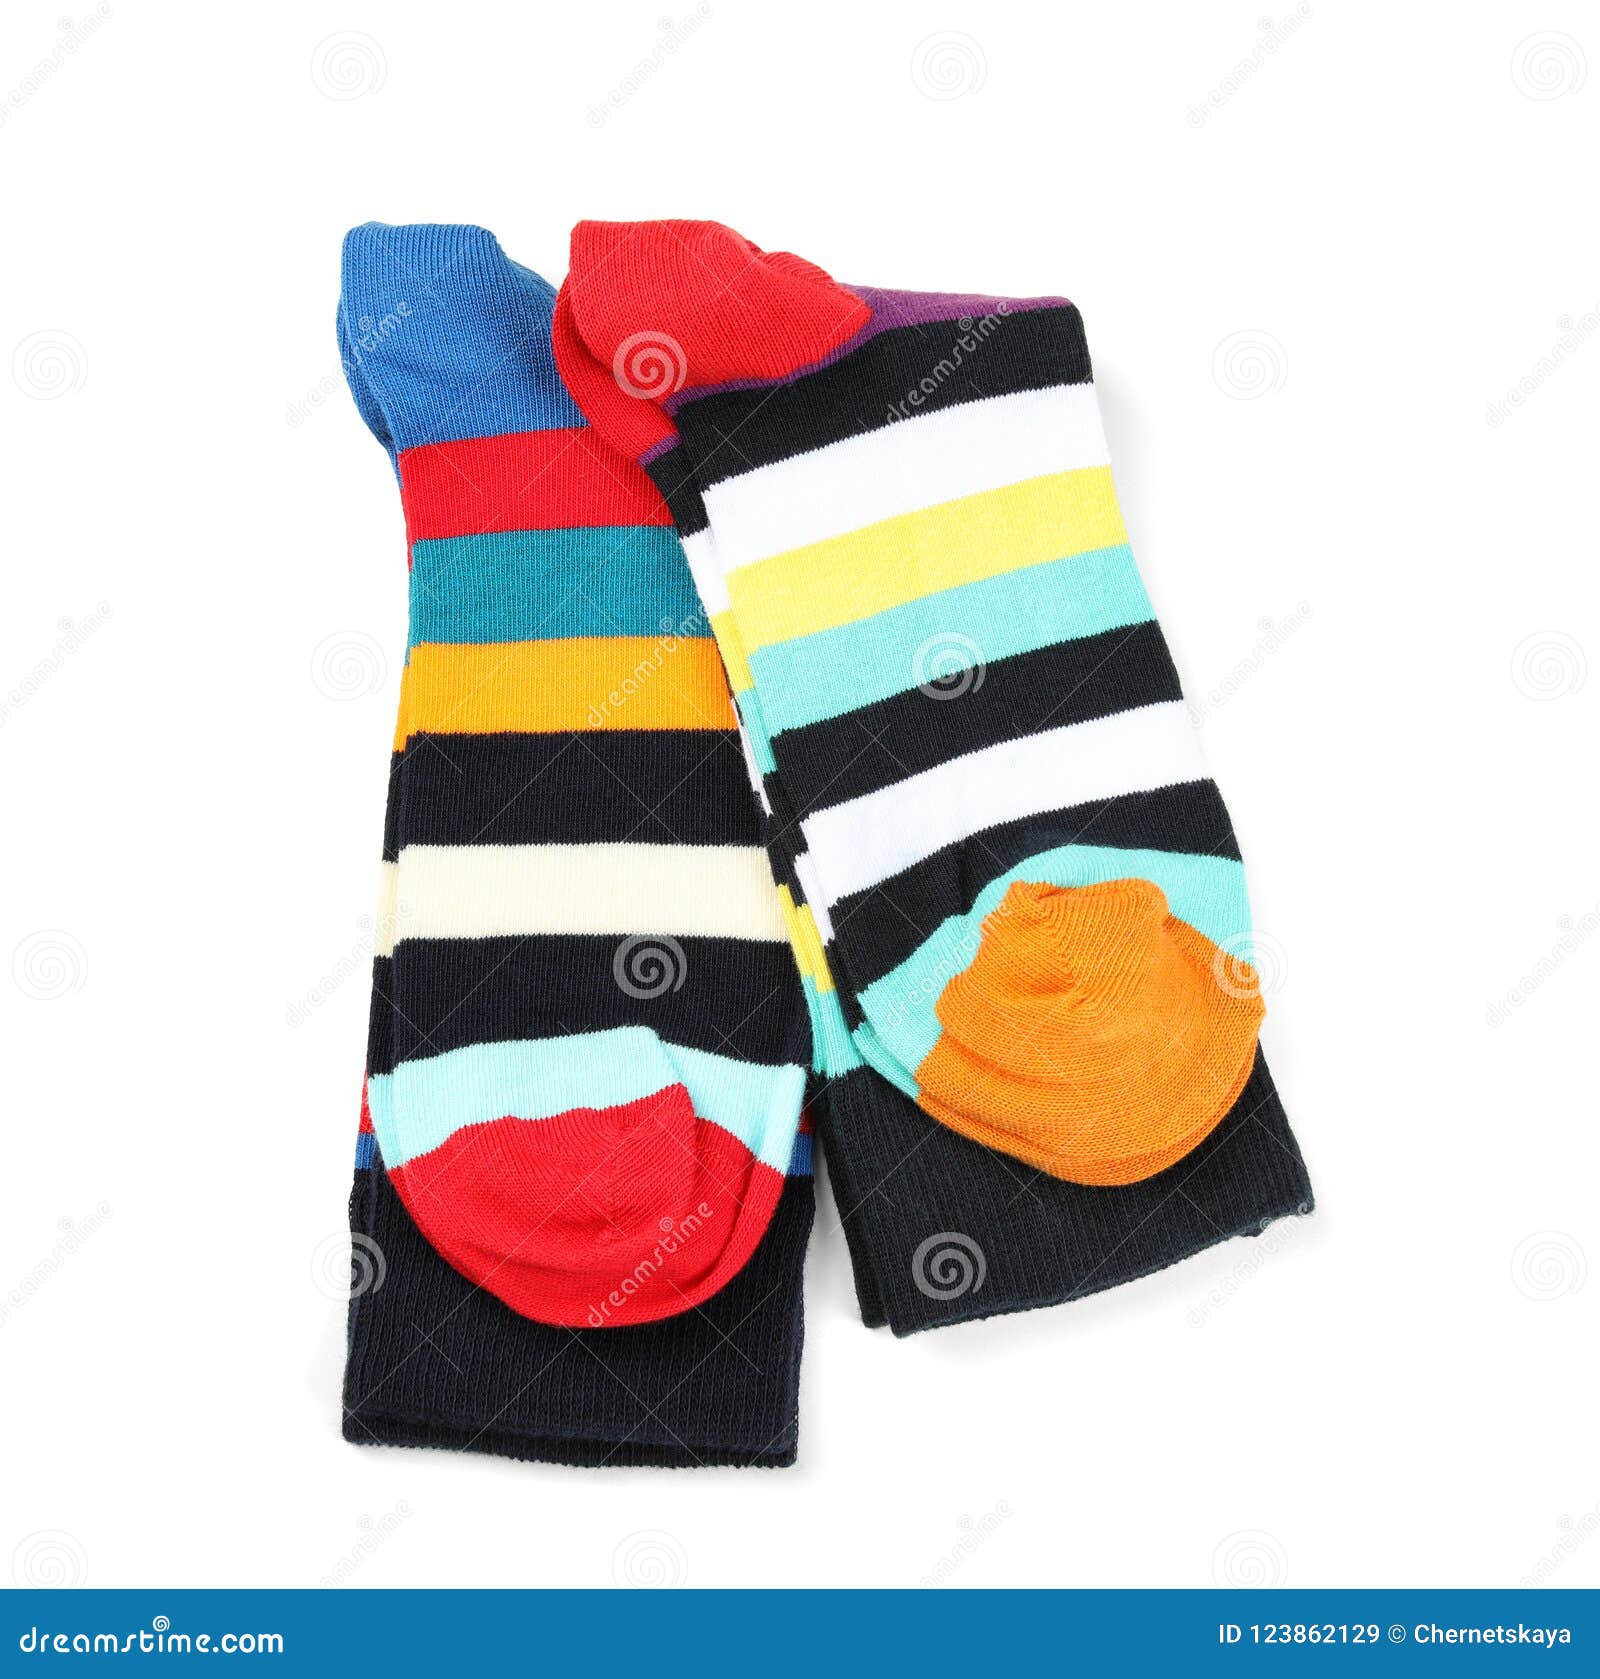 Colorful Socks on White Background Stock Image - Image of foot, cloth ...